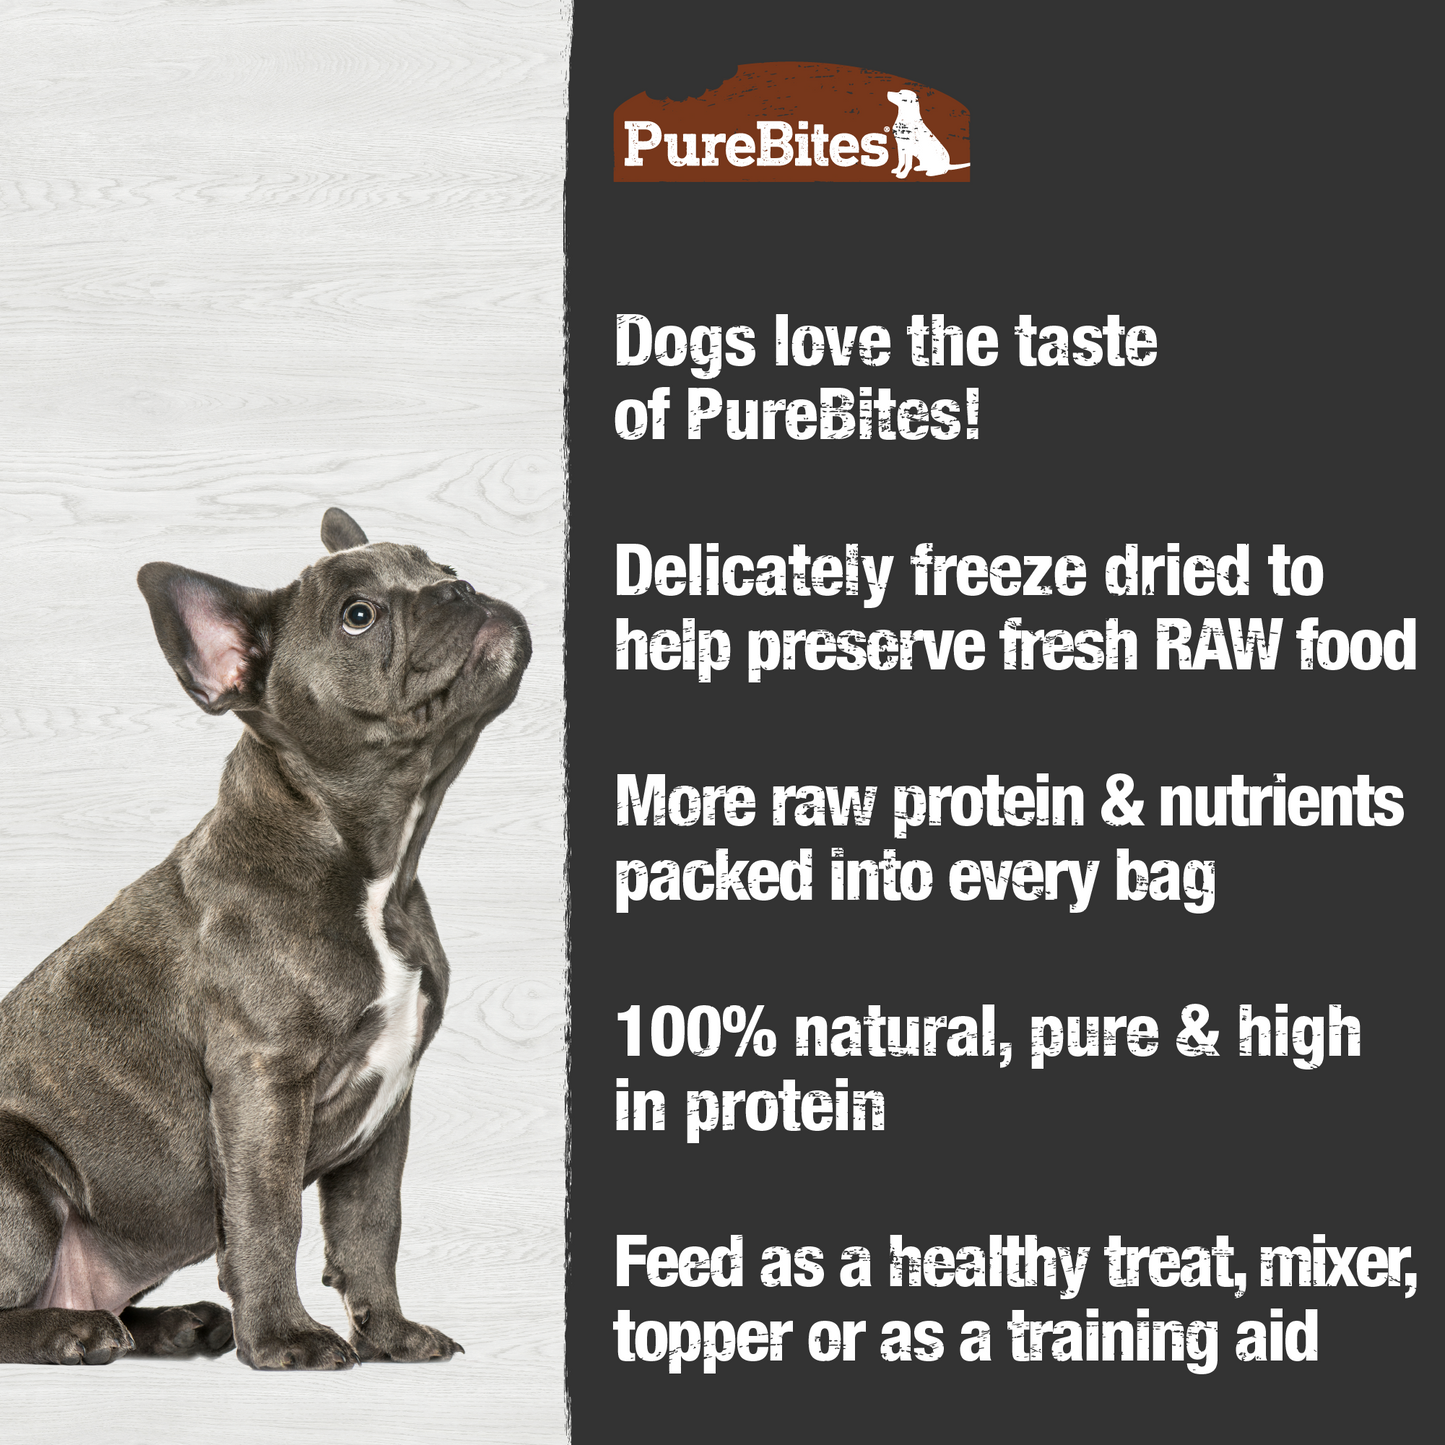 Made fresh & pure means more RAW protein and nutrients packed into every bag. Our turkey is freeze dried to help preserve its RAW taste, and nutrition, and mirror a dog’s ancestral diet